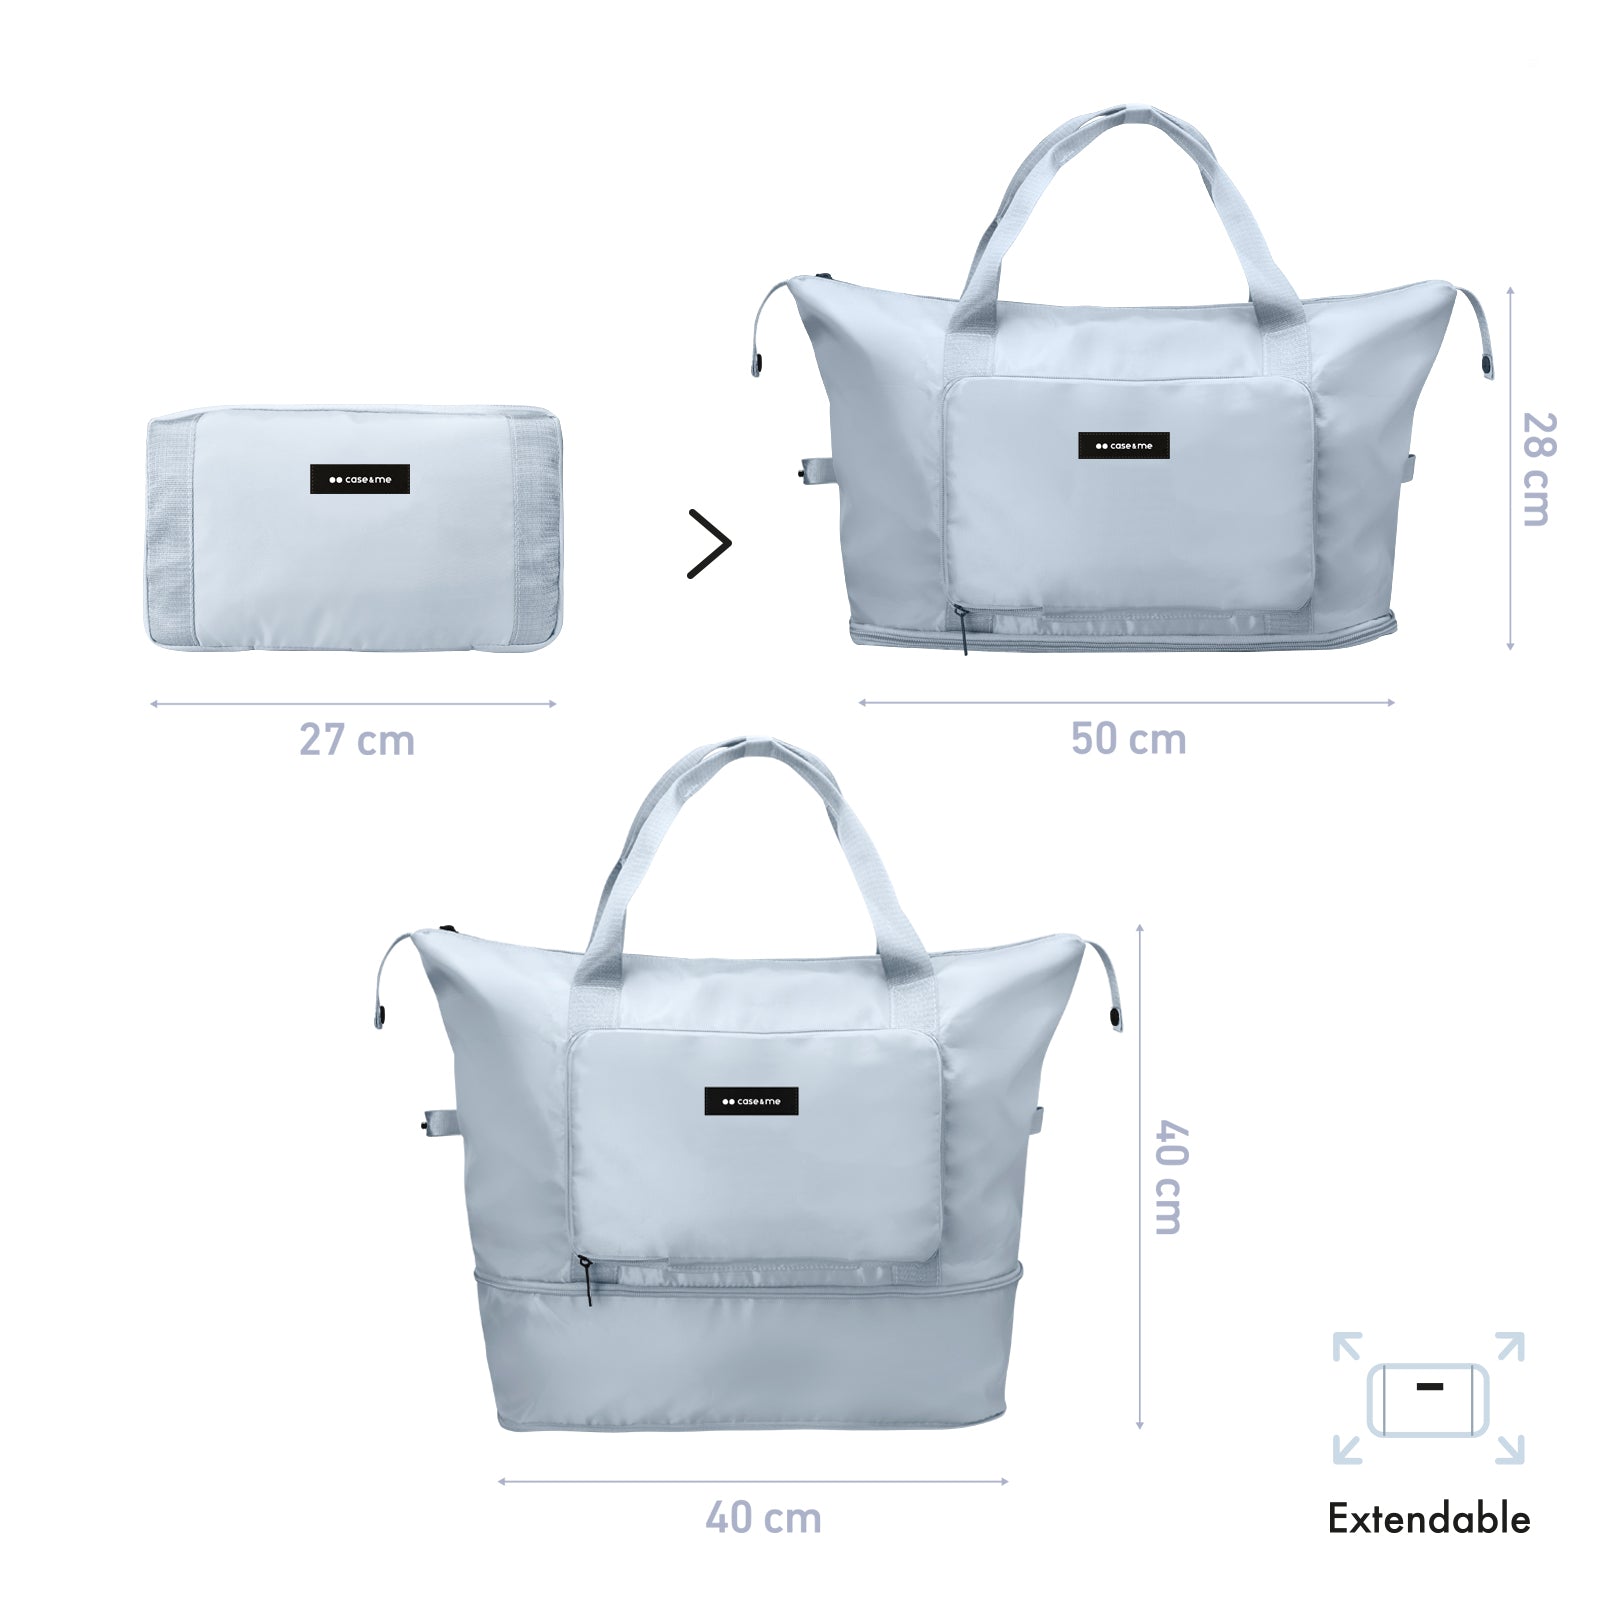 Foldable and expandable waterproof bag